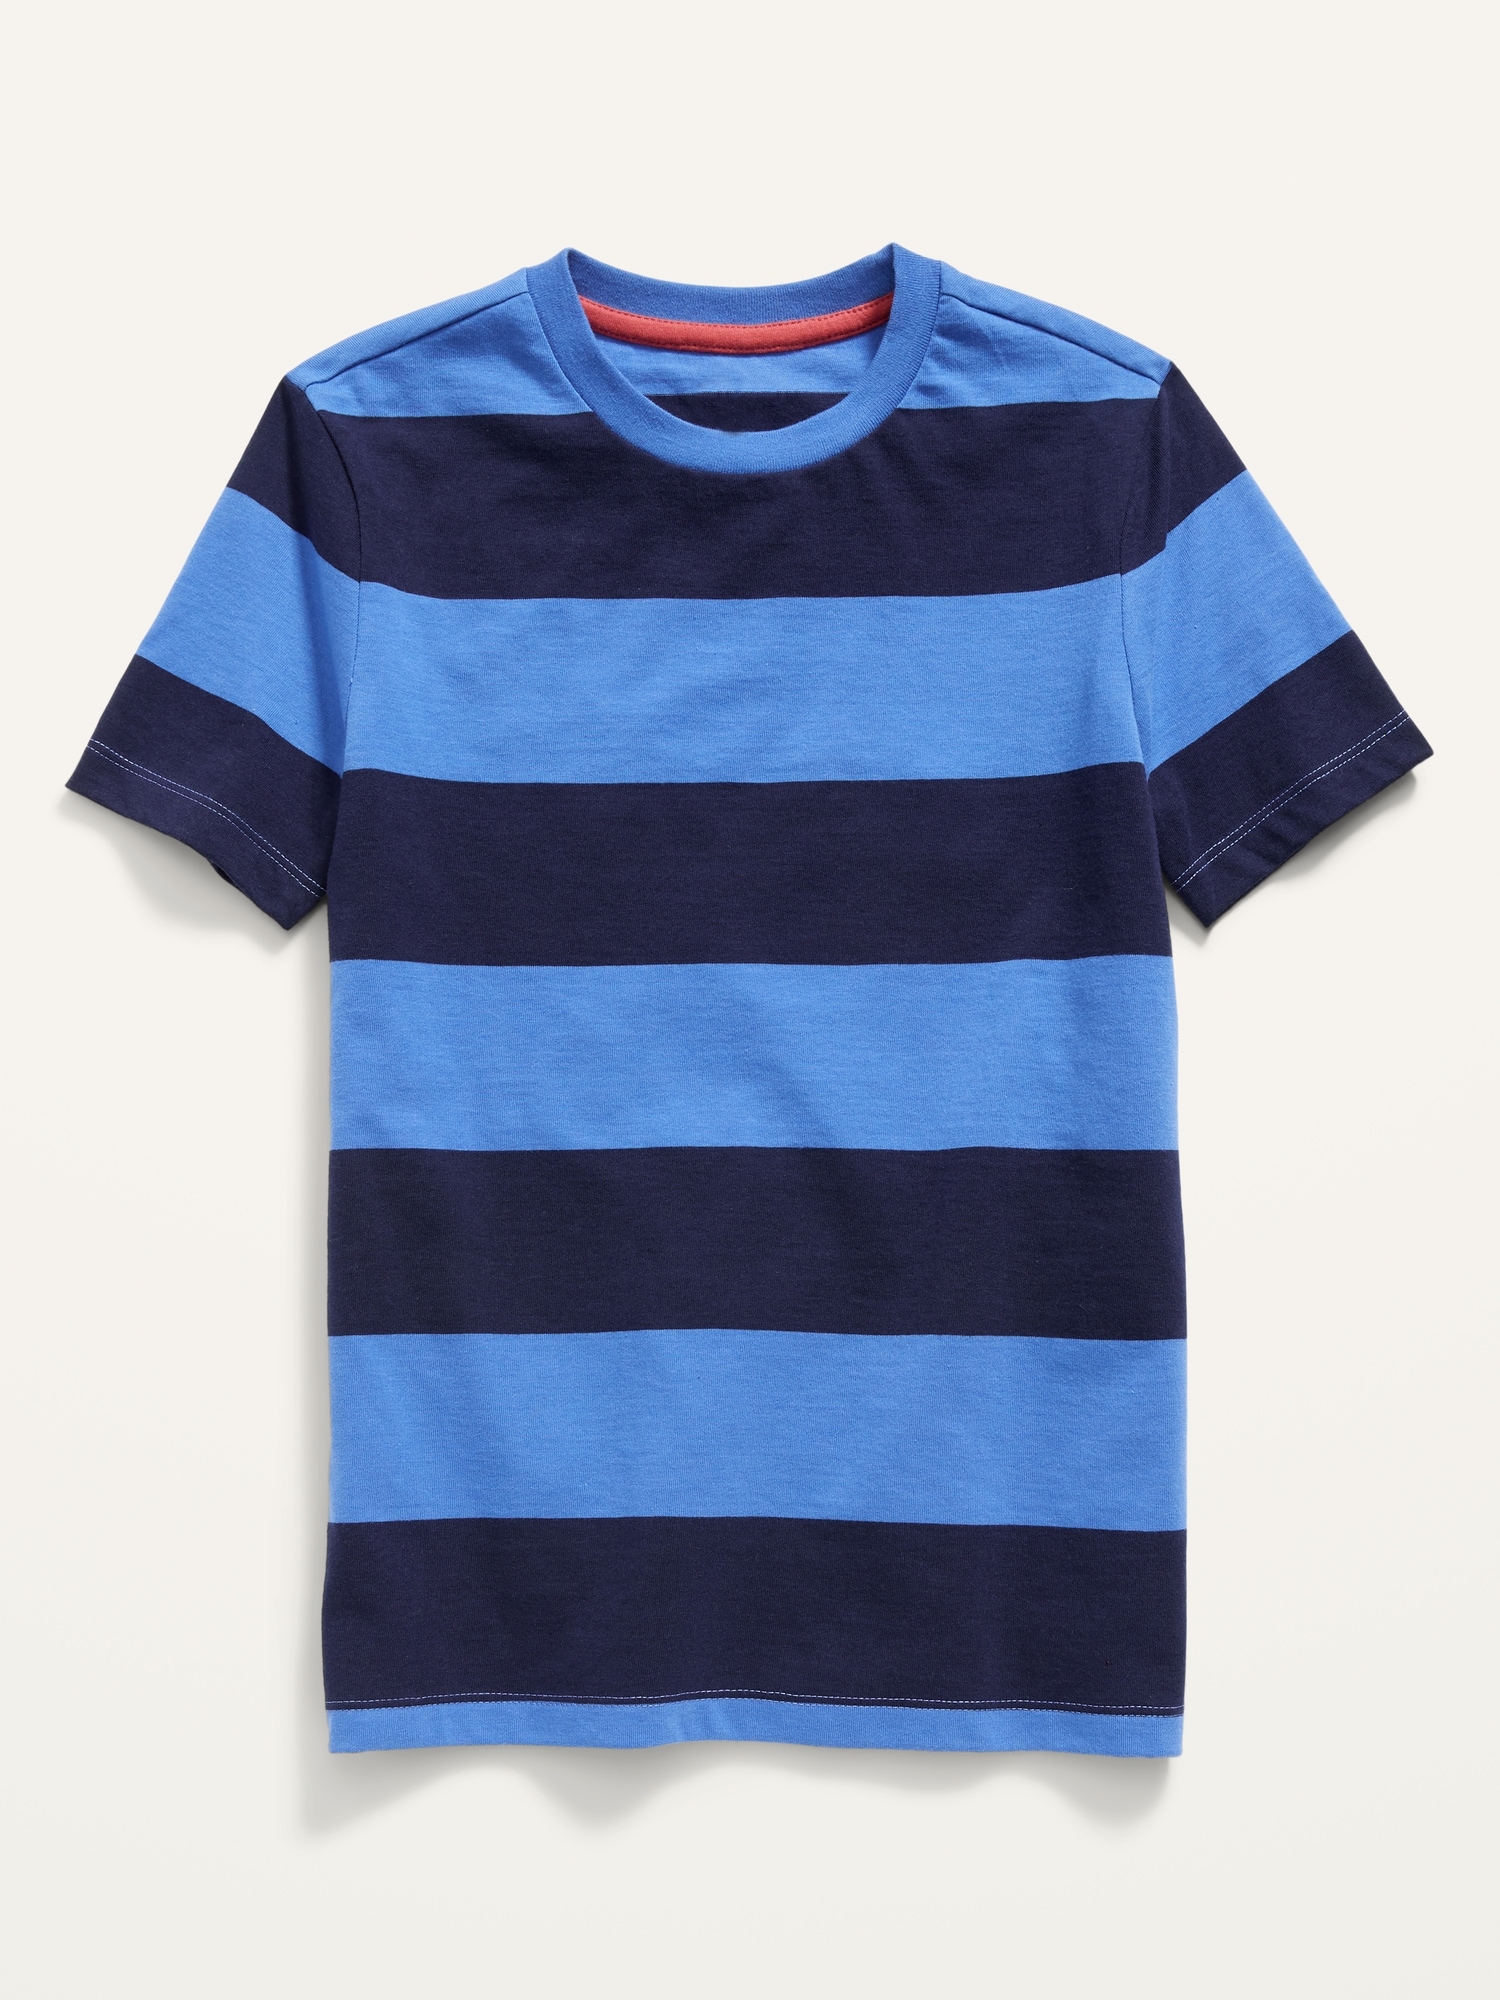 vintage-striped-short-sleeve-tee-for-boys-old-navy